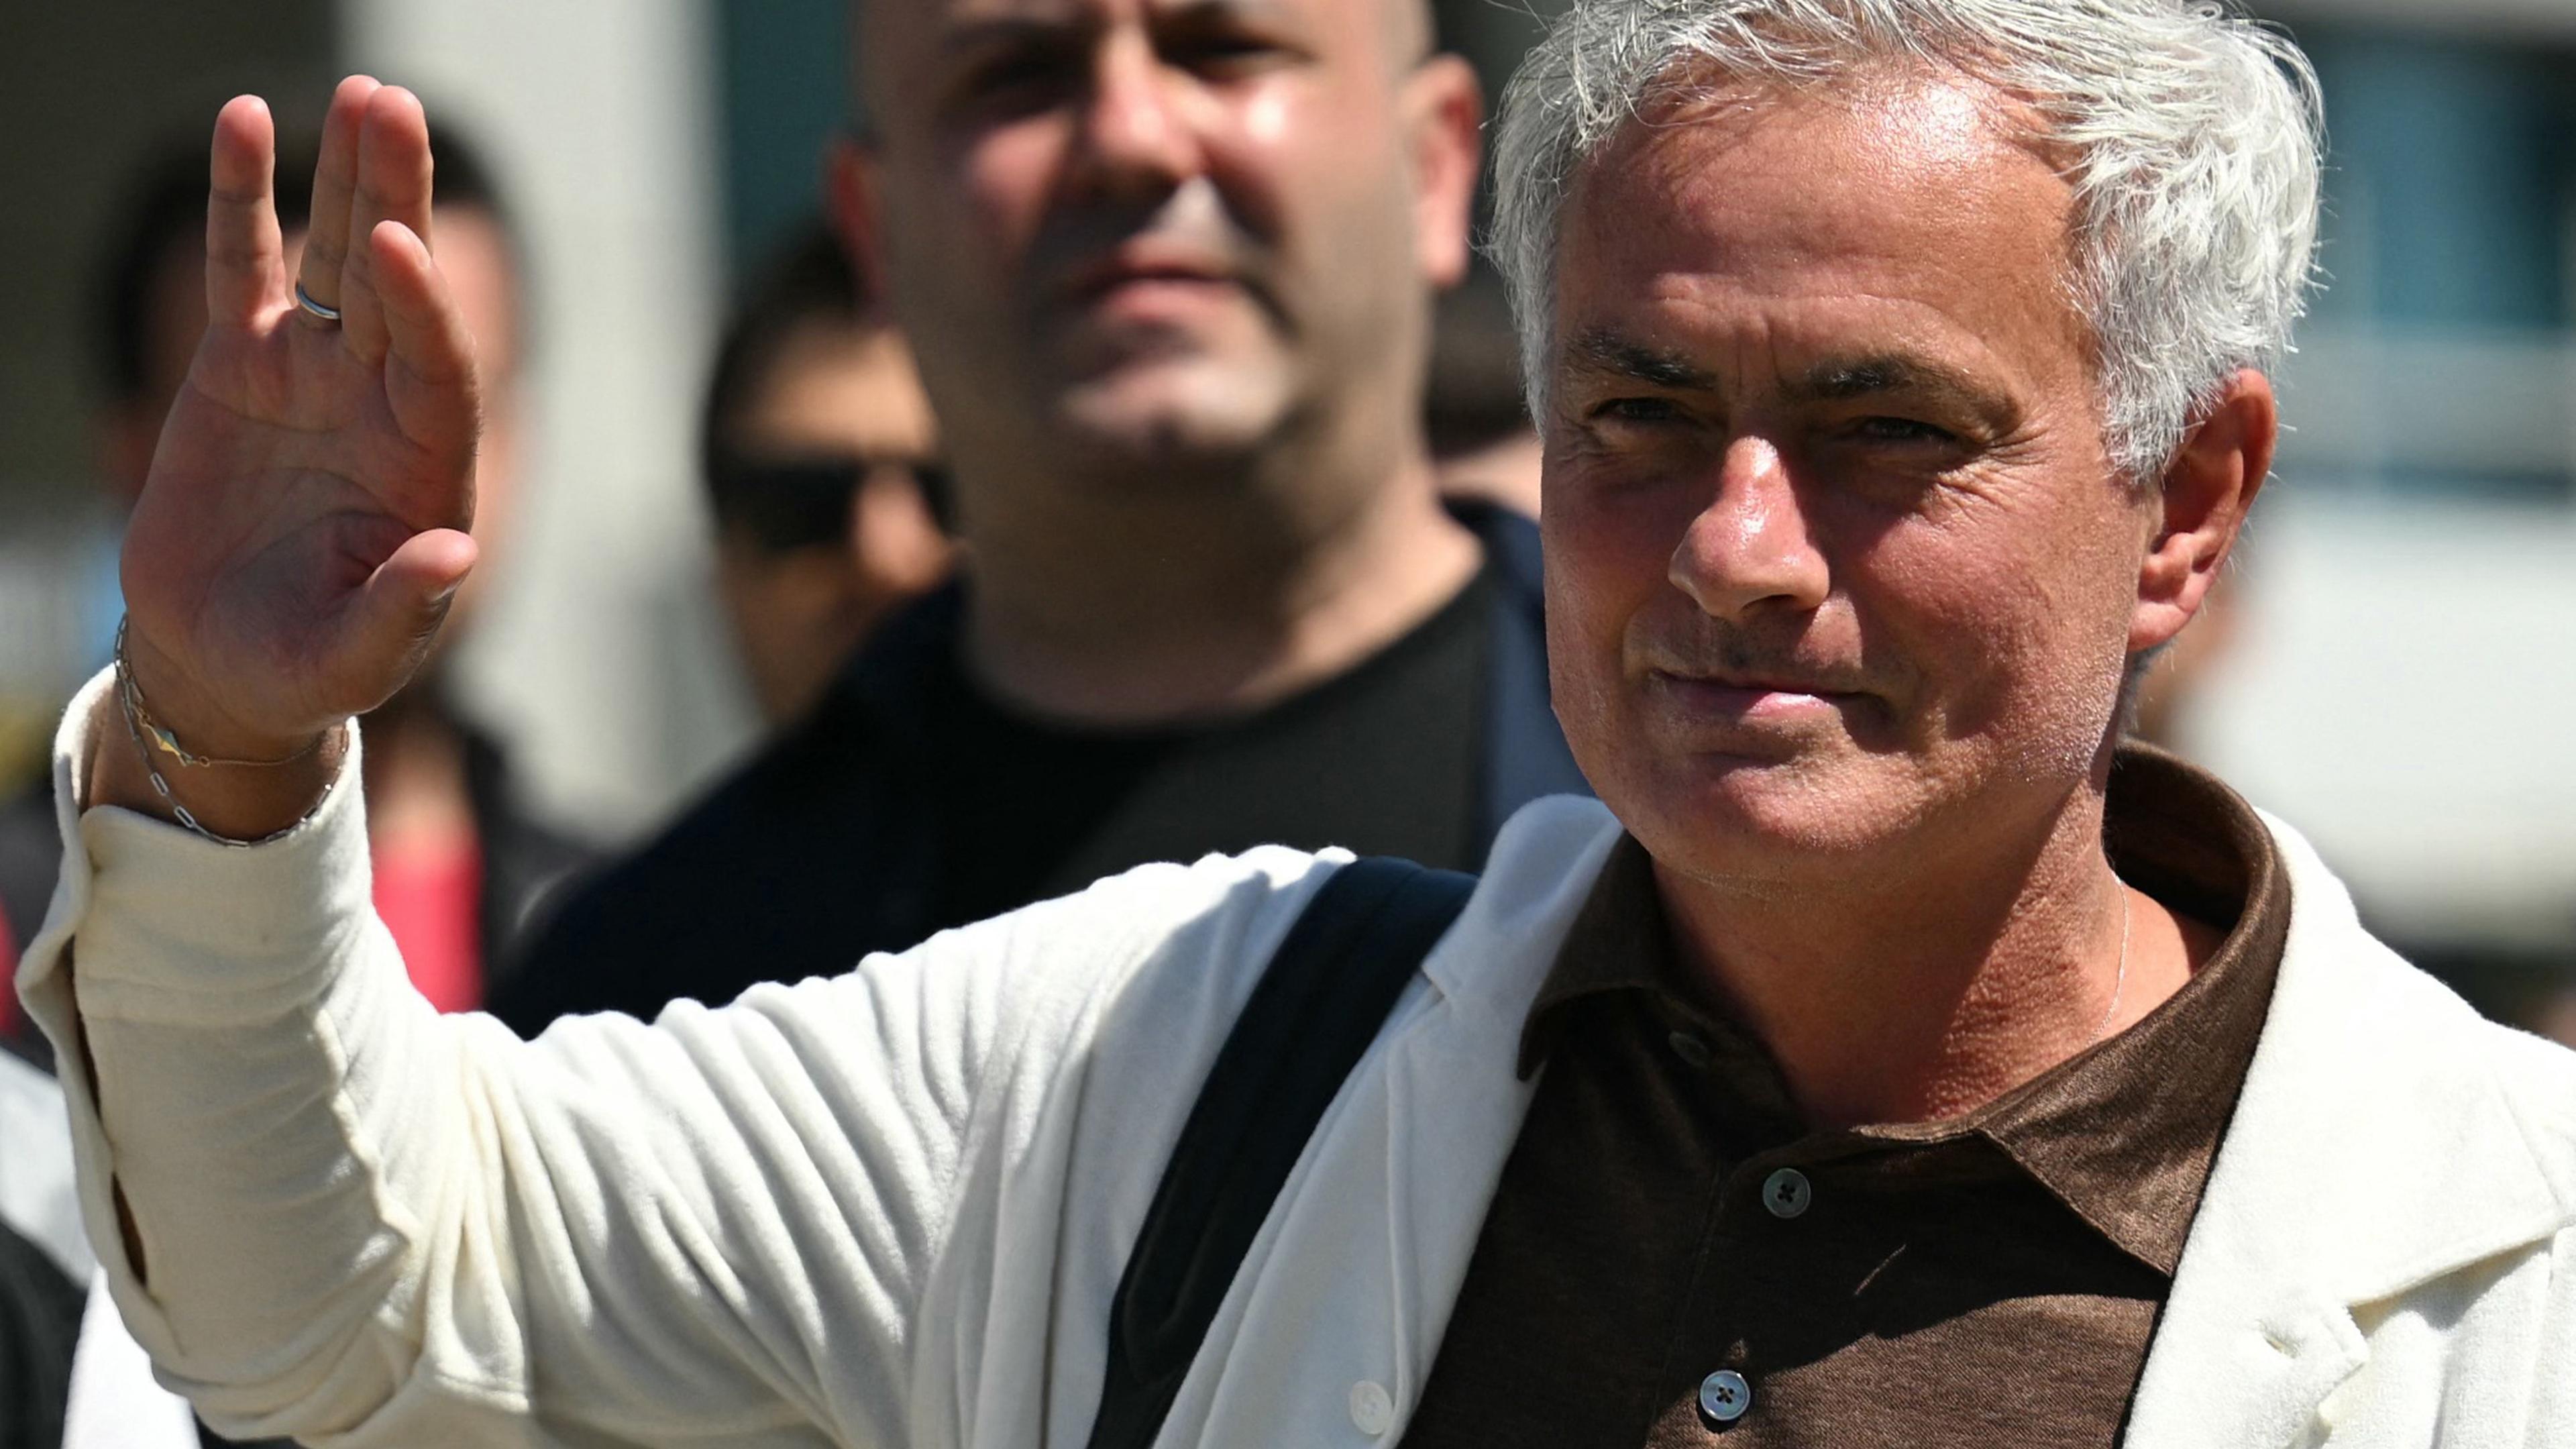 New coach of Turkish club Fenerbahce Jose Mourinho waves to fans upon his arrival in Istanbul on June 2, 2024. Two-time Champions League winning Jose Mourinho will be the new coach of Turkish club Fenerbahce, he announced on June 1. The Portuguese coach, who won the Champions League with Porto and Inter Milan, has not worked since he was sacked by Italian Serie A side Roma in January 2024. (Photo by OZAN KOSE / AFP)